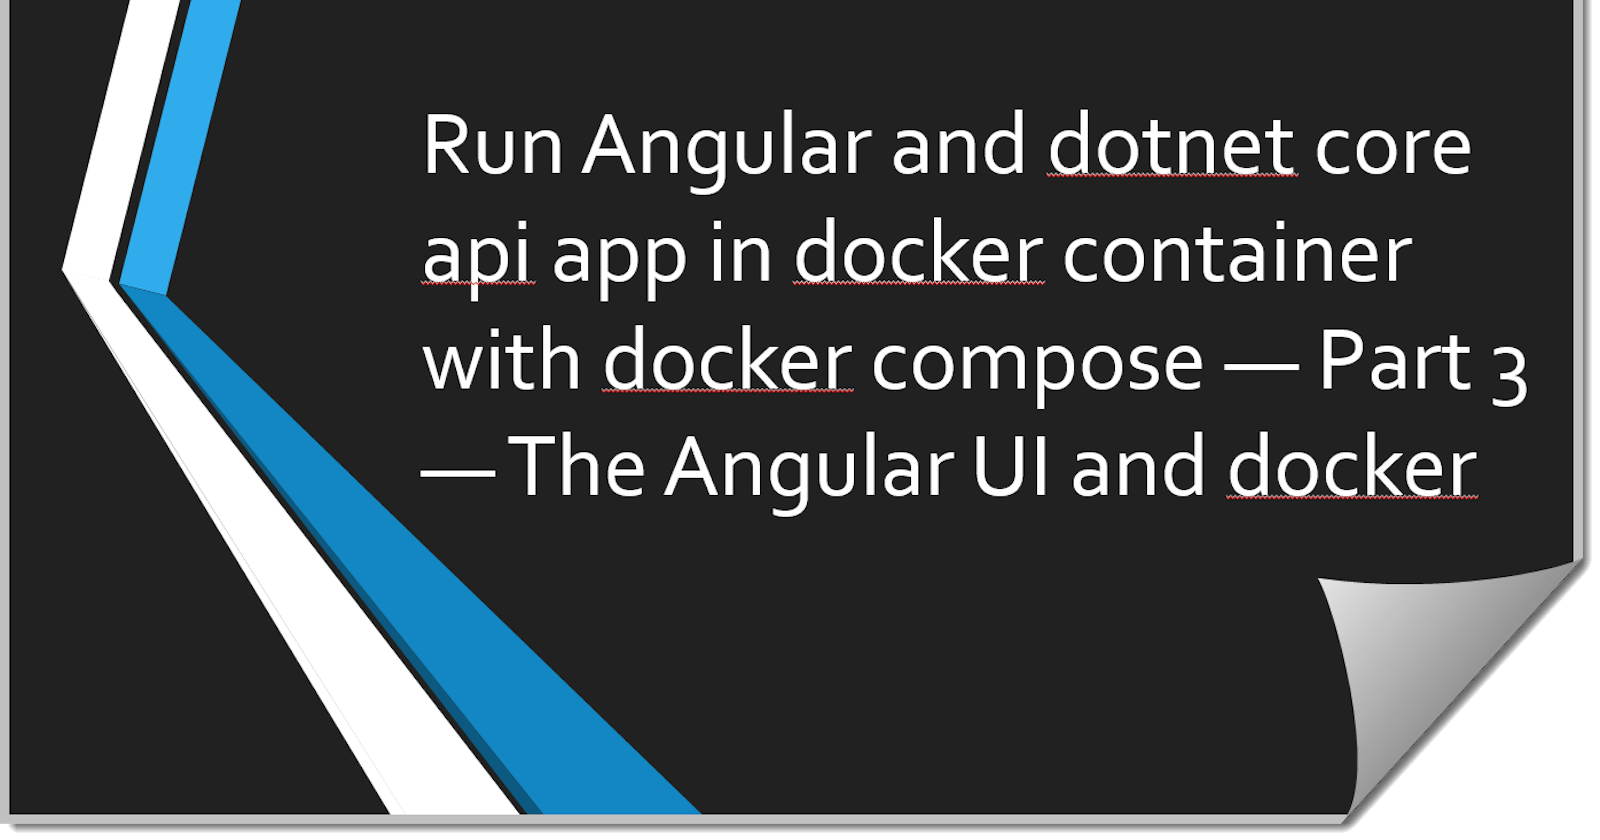 Run Angular and dotnet core api app in docker container with docker compose — Part 3 — The Angular UI and docker